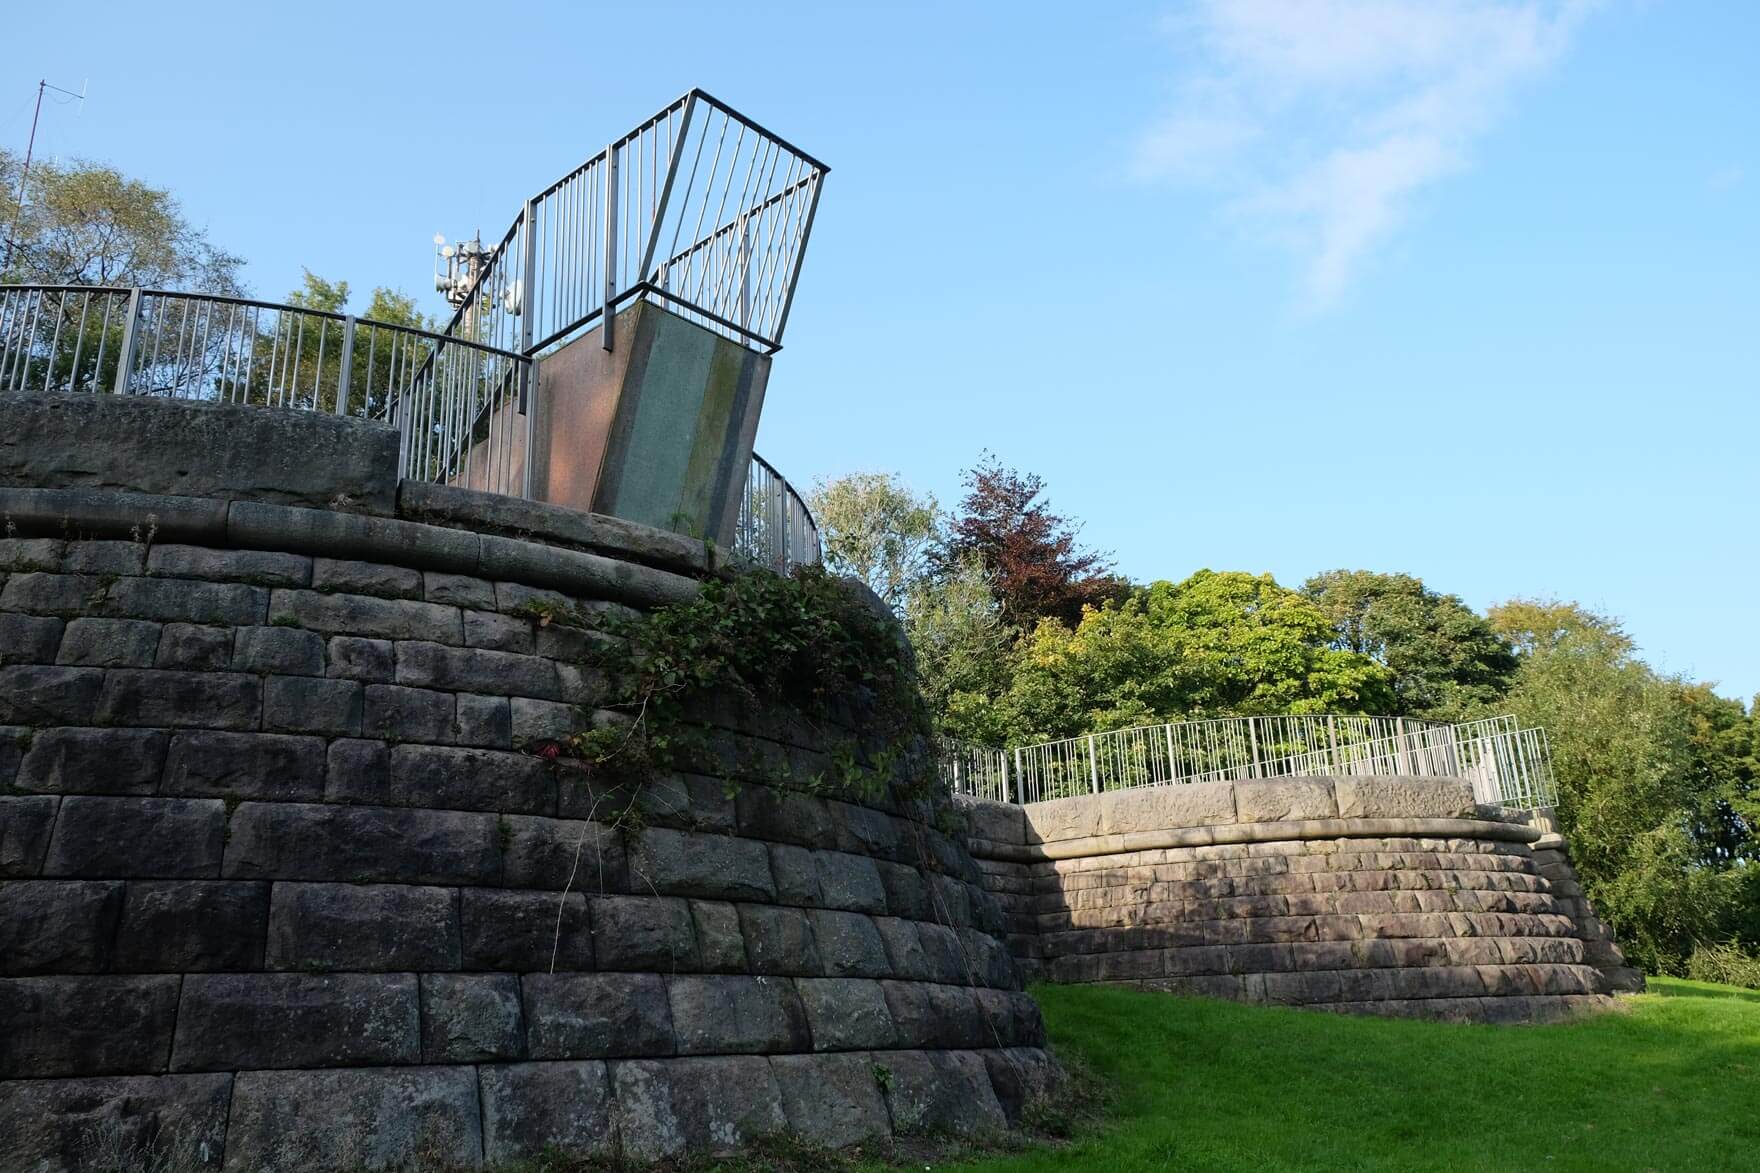 The Colourfields Panopticon in Blackburn's Corporation Park is built on top of the Victorian cannon battery